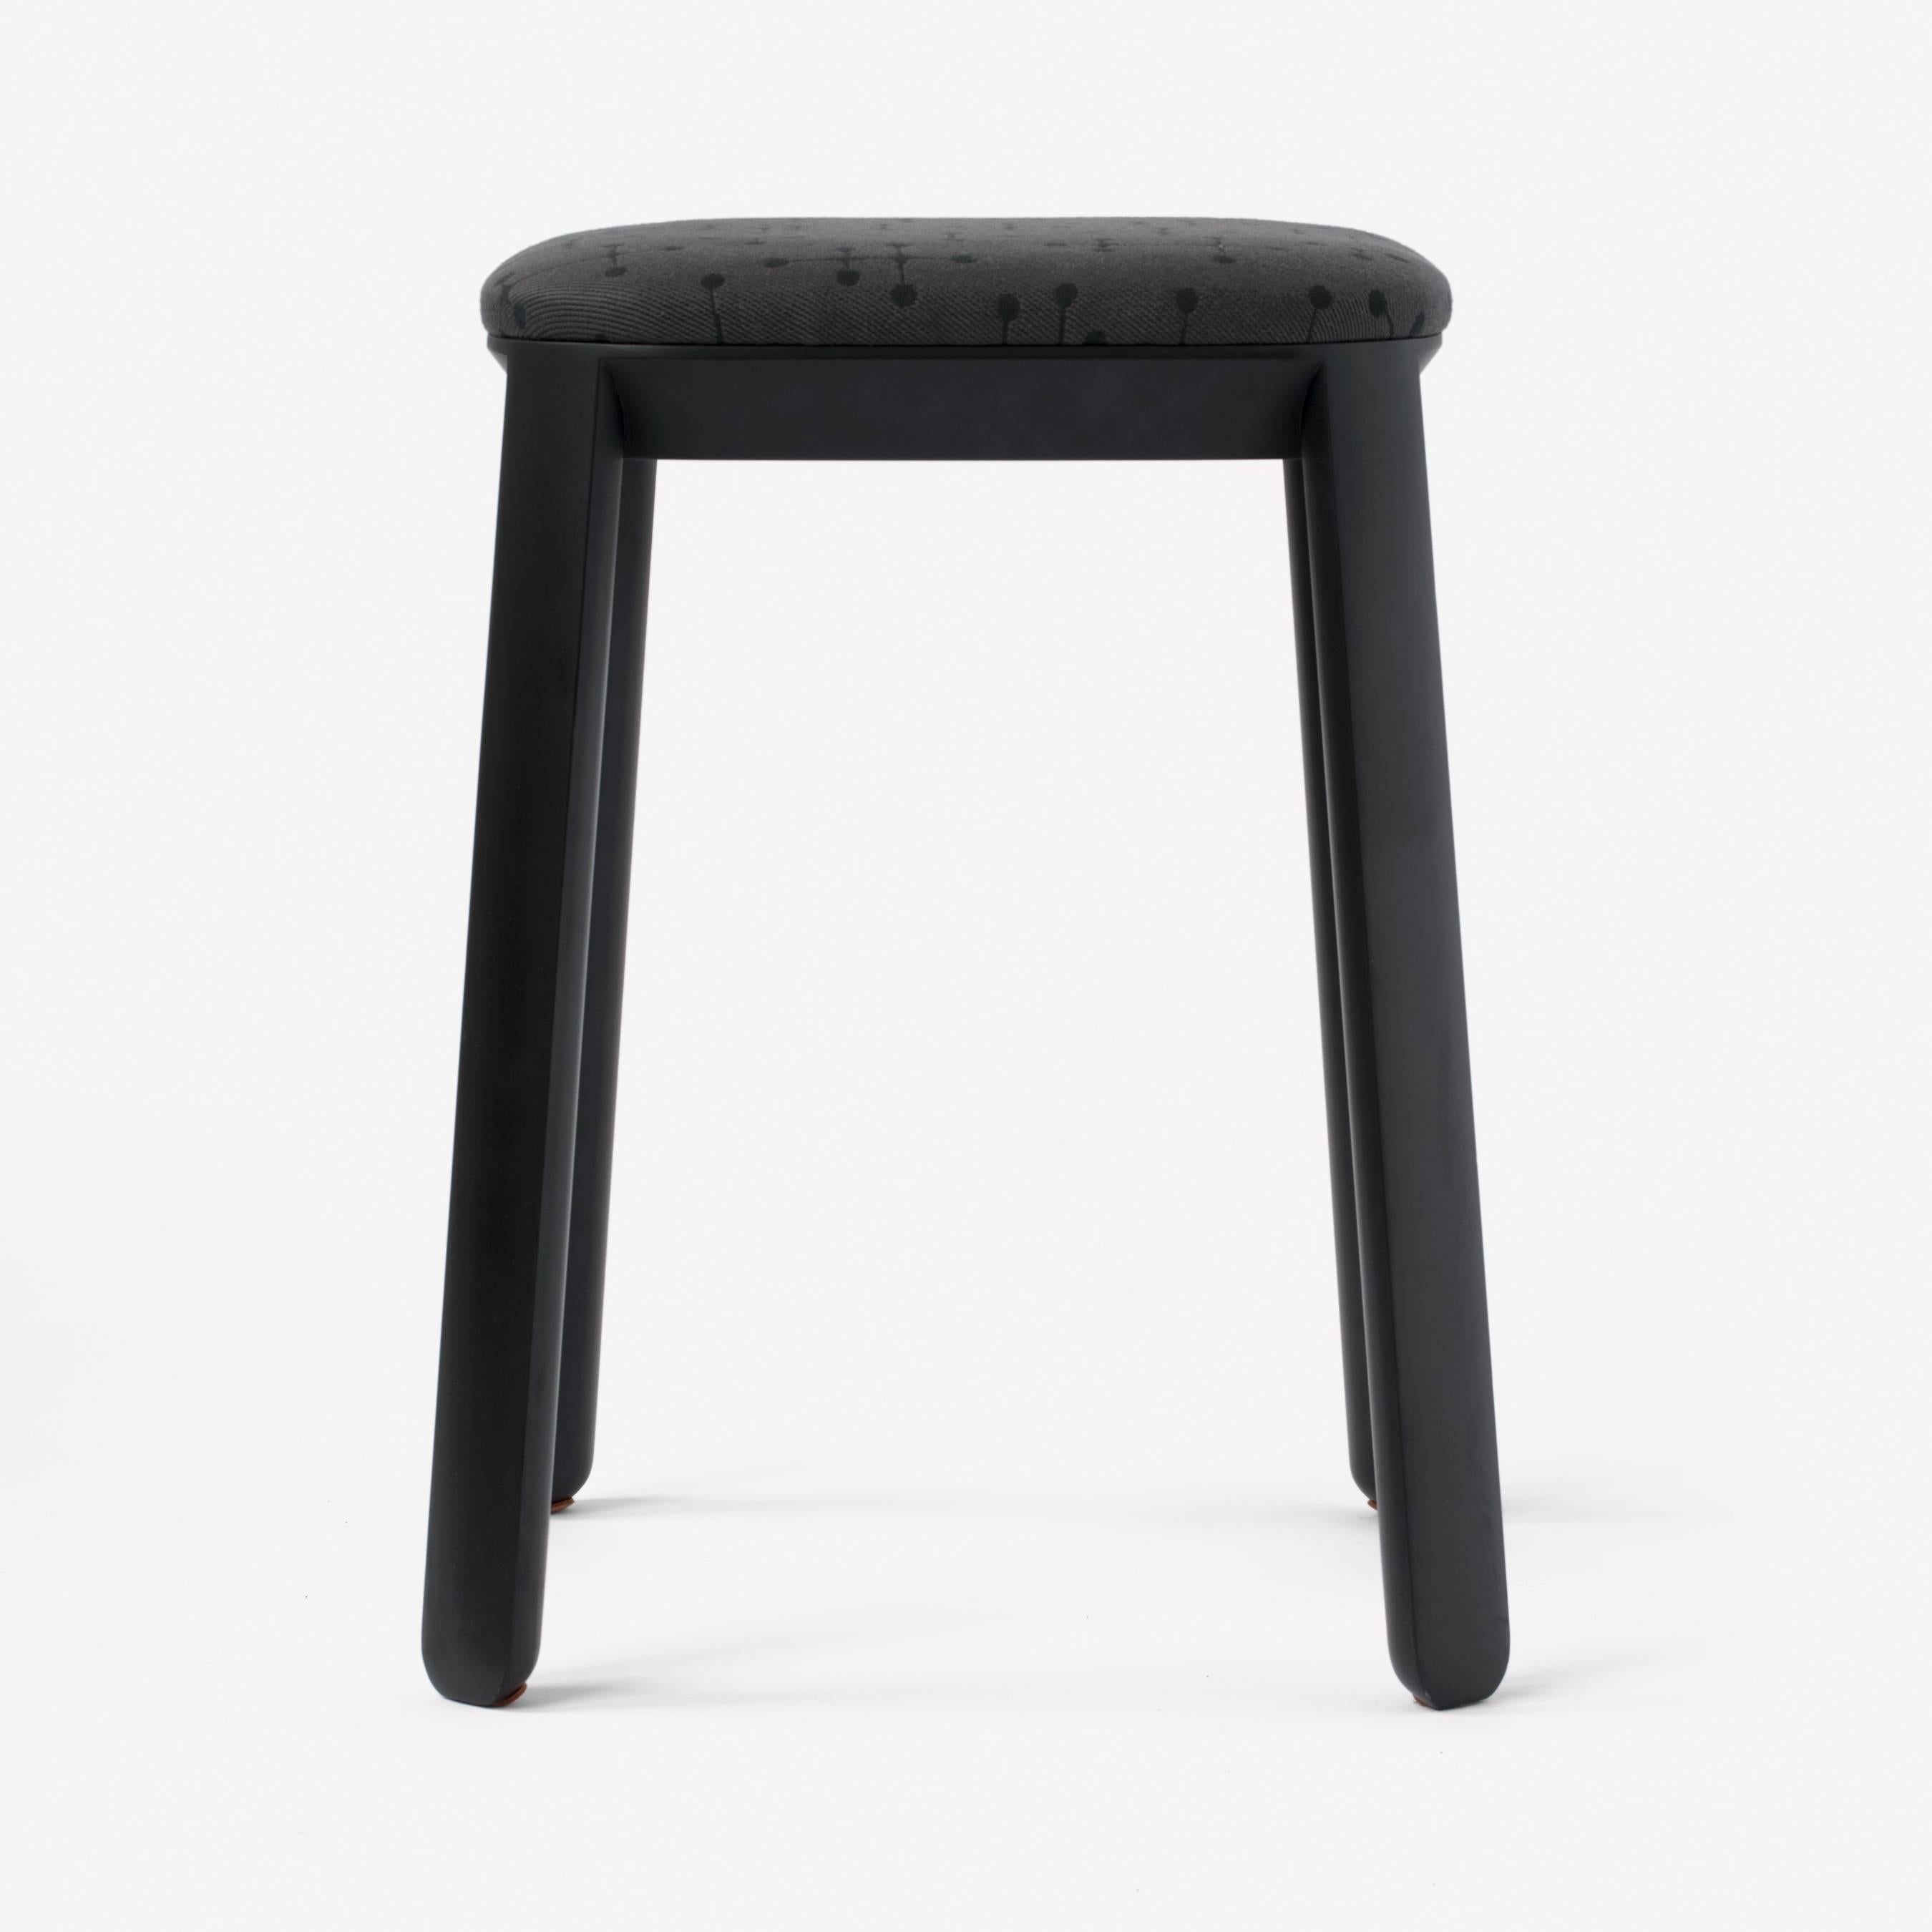 Covered Stool by Scholten & Baijings
Small Dot Pattern by Charles and Ray Eames, 1947
105 Charcoal

Tinted beechwood base with Small Dot pattern textile. Stackable. Made in Japan by Karimoku New Standard.

Scholten & Baijings for Maharam is a